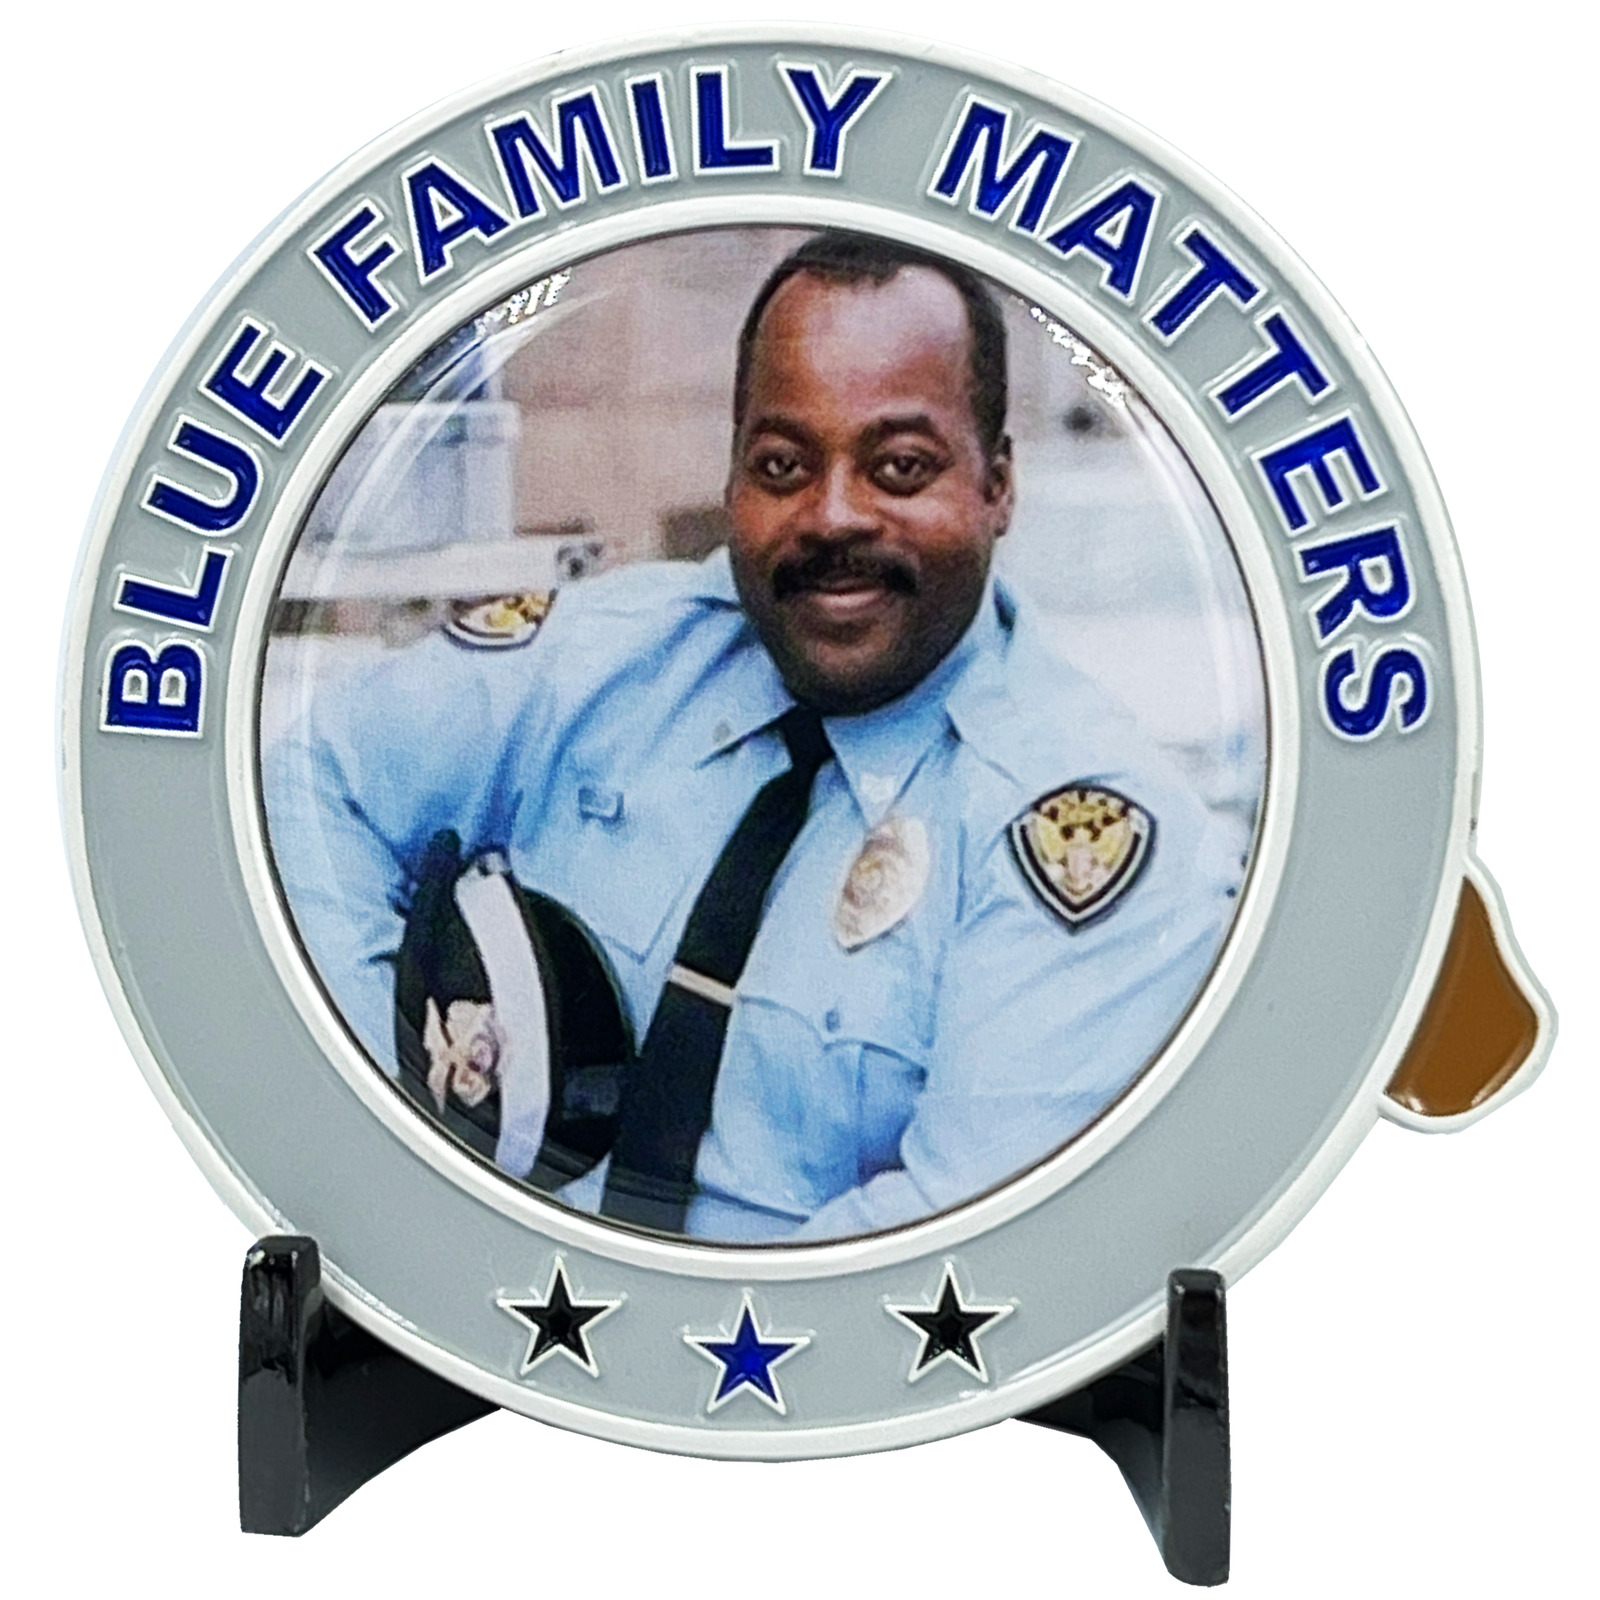 Urkel BLUE Family Matters thin blue line police challenge coin BL10-002